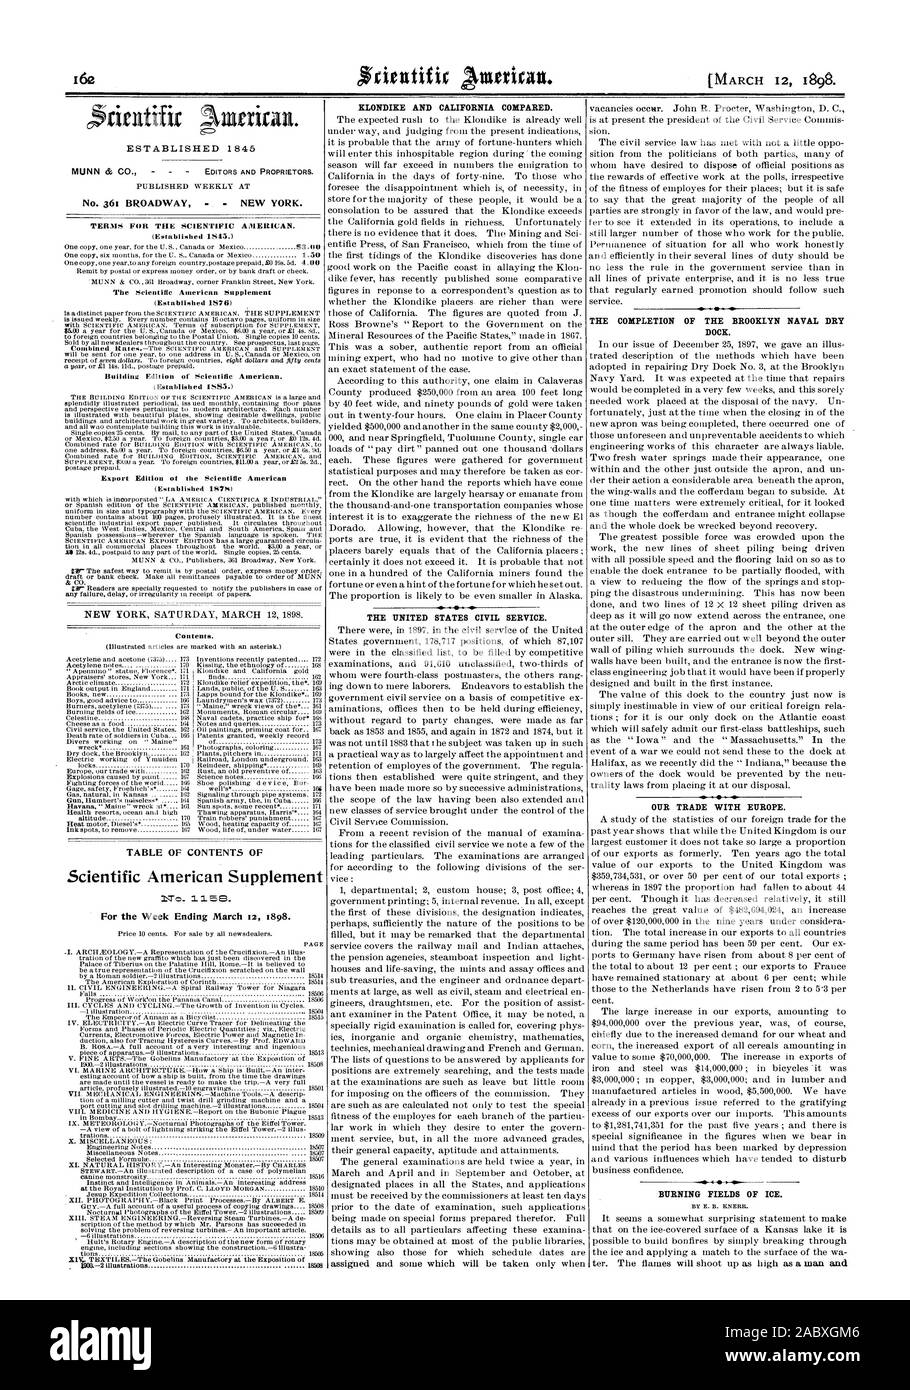 TERMS FOR THE SCIENTIFIC AMERICAN. (Established 1845.) 1.50 The Scientific American Supplement (Established 1876) Building Edition of Scientific American. (Established 1585.) Export Edition ot the Scientific American (Established 1575) Scientific American Supplement 3.158. For the Week Ending March 12 1898. KLONDIKE AND CALIFORNIA COMPARED. THE UNITED STATES CIVIL SERVICE. THE COMPLETION OF THE BROOKLYN NAVAL DRY DOCK. OUR TRADE WITH EUROPE. BURNING FIELDS OF ICE. Contents. TABLE OF CONTENTS OF ESTABLISHED 1 845, 98-03-12 Stock Photo